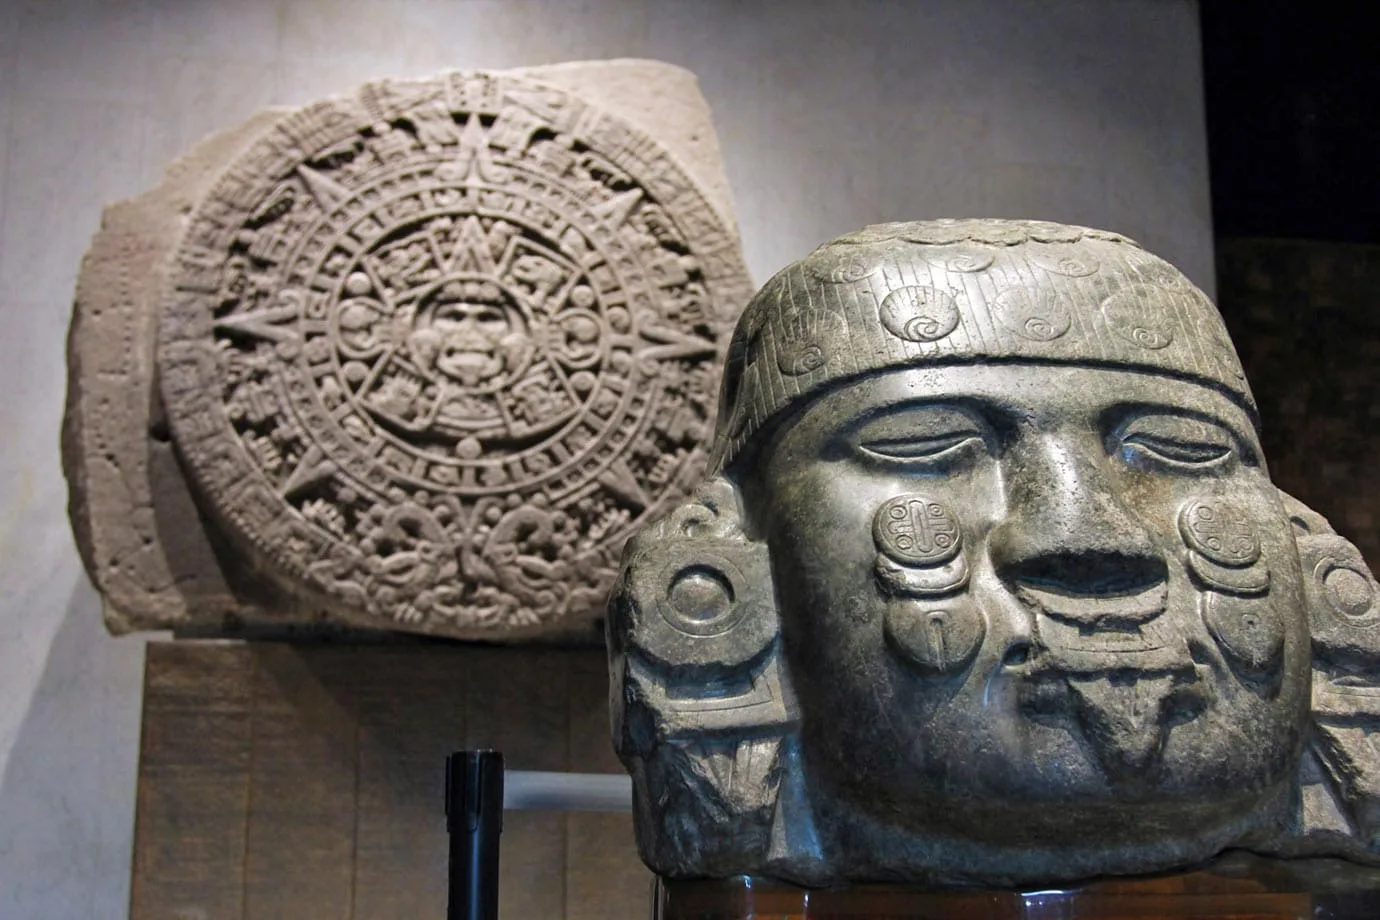 This is the Stone of the Sun, otherwise known as the Aztec Calendar Stone